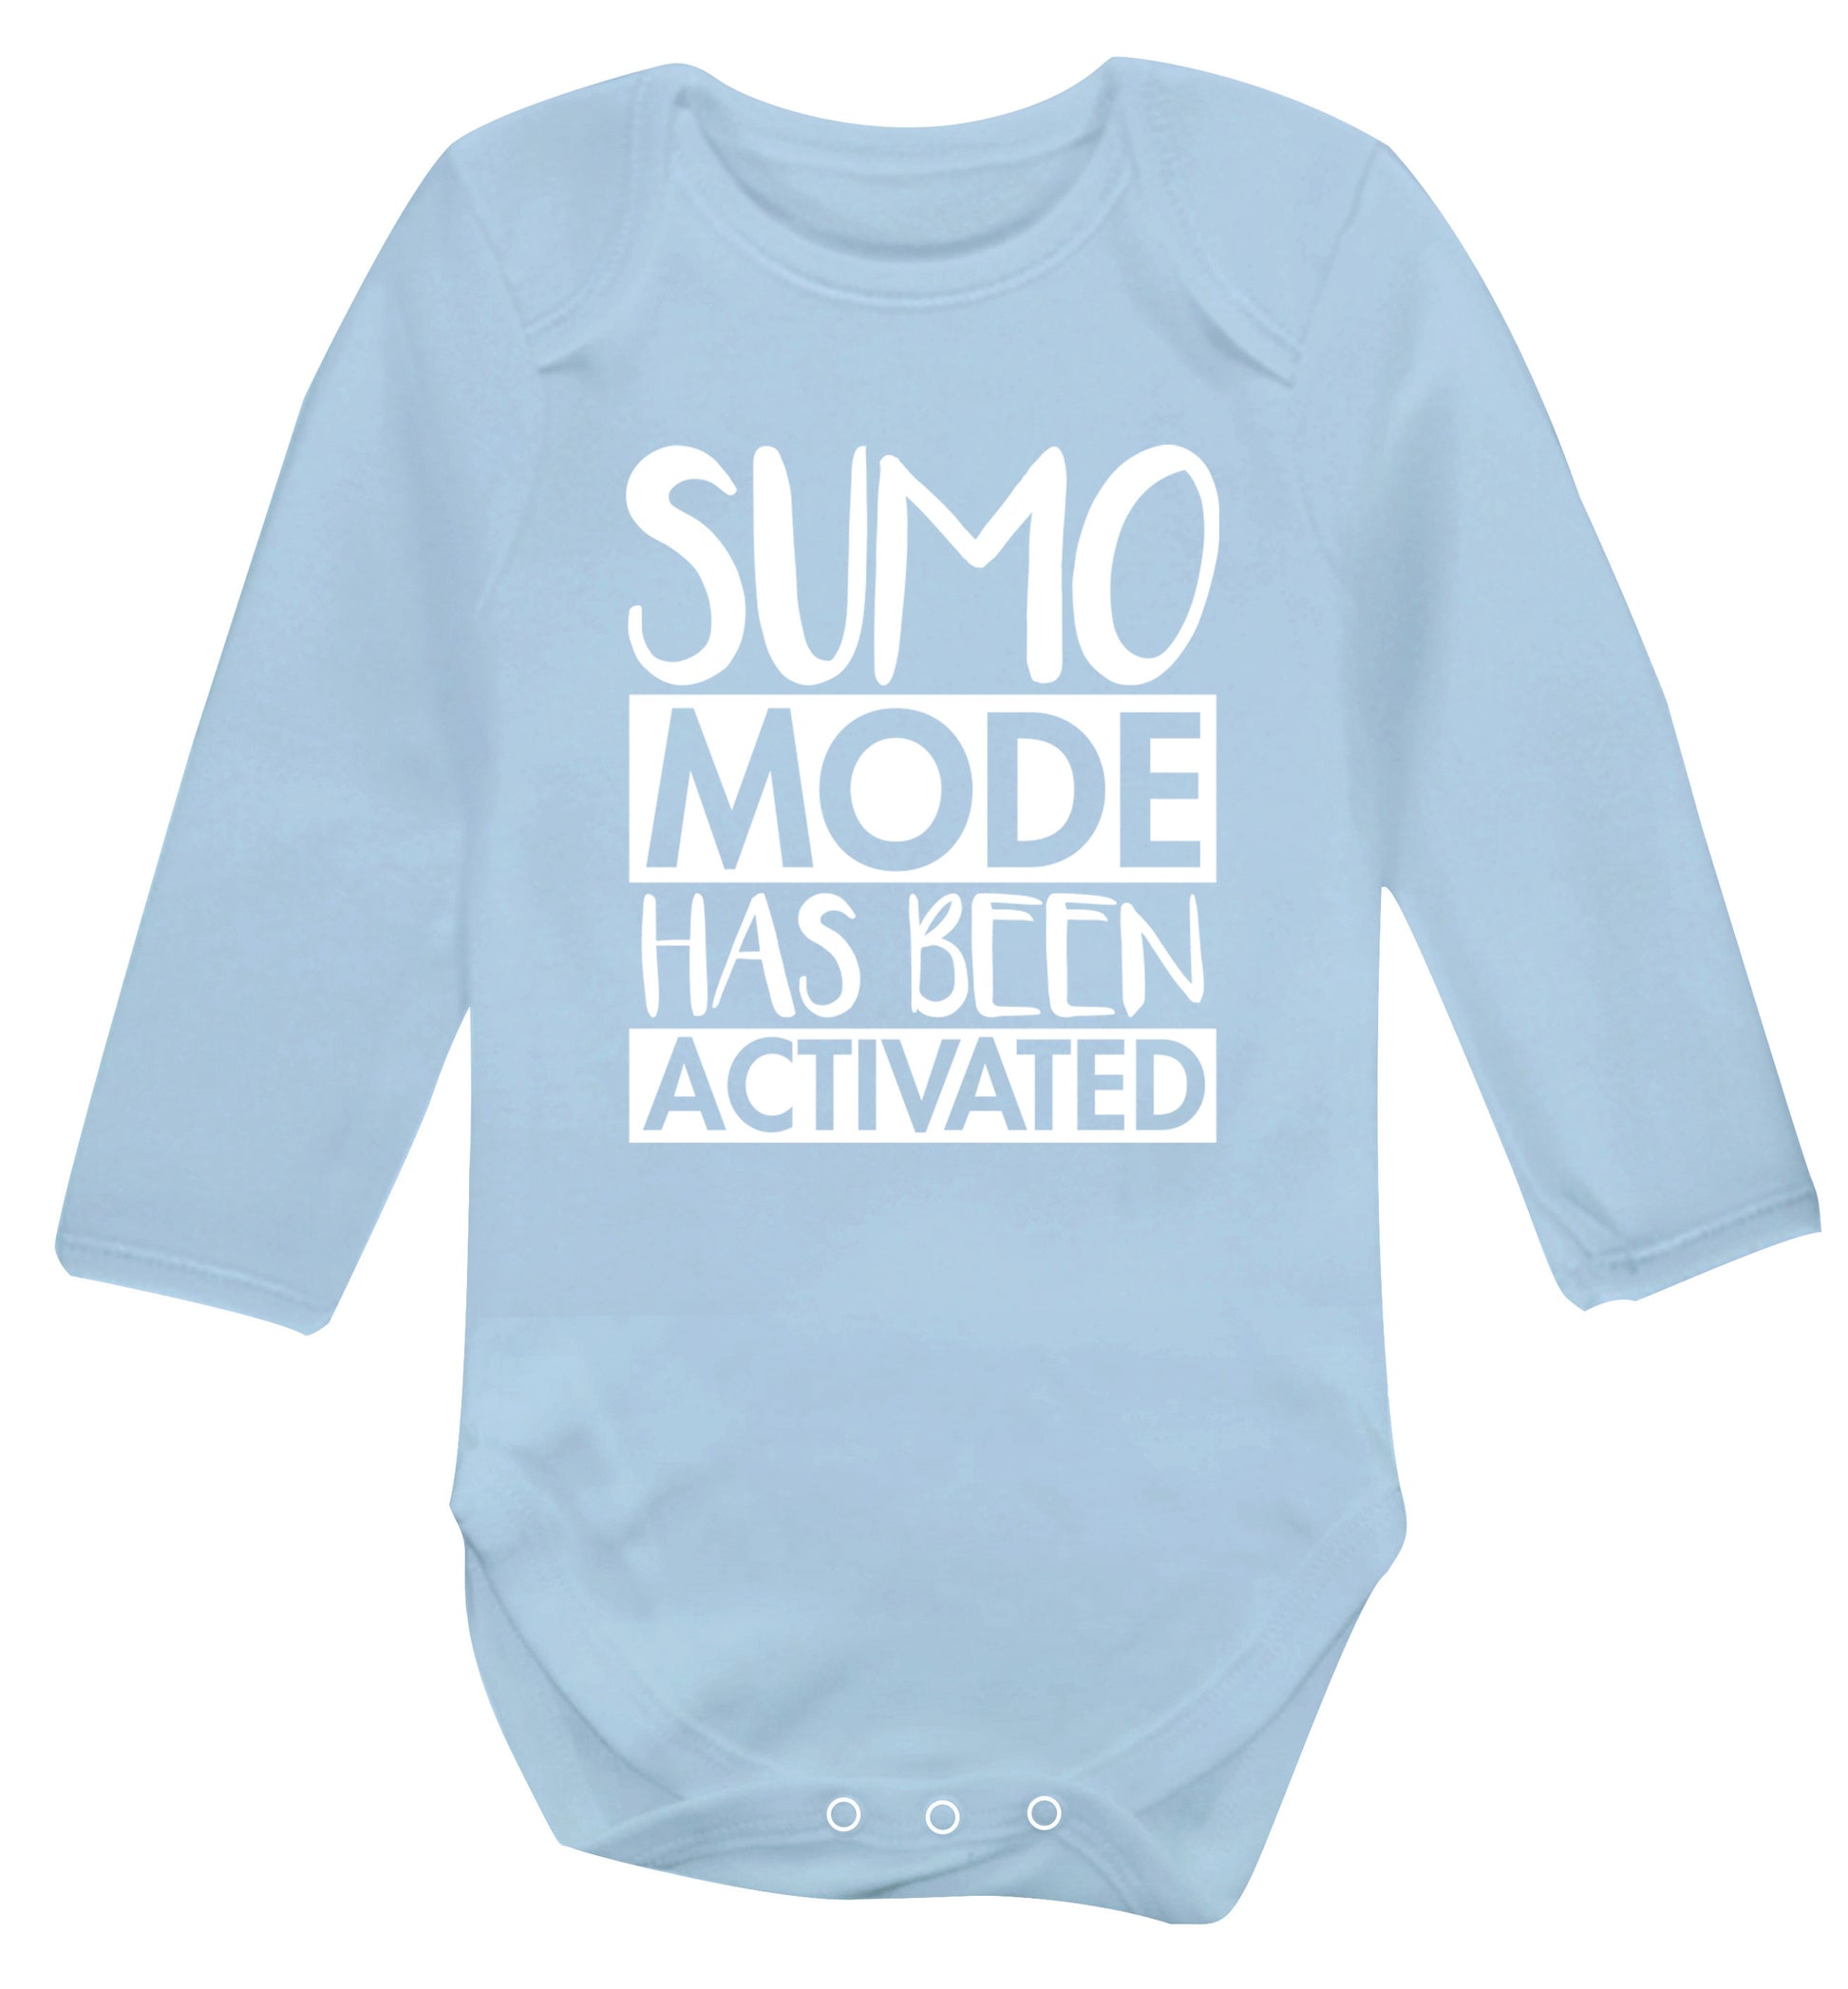 Sumo mode activated Baby Vest long sleeved pale blue 6-12 months